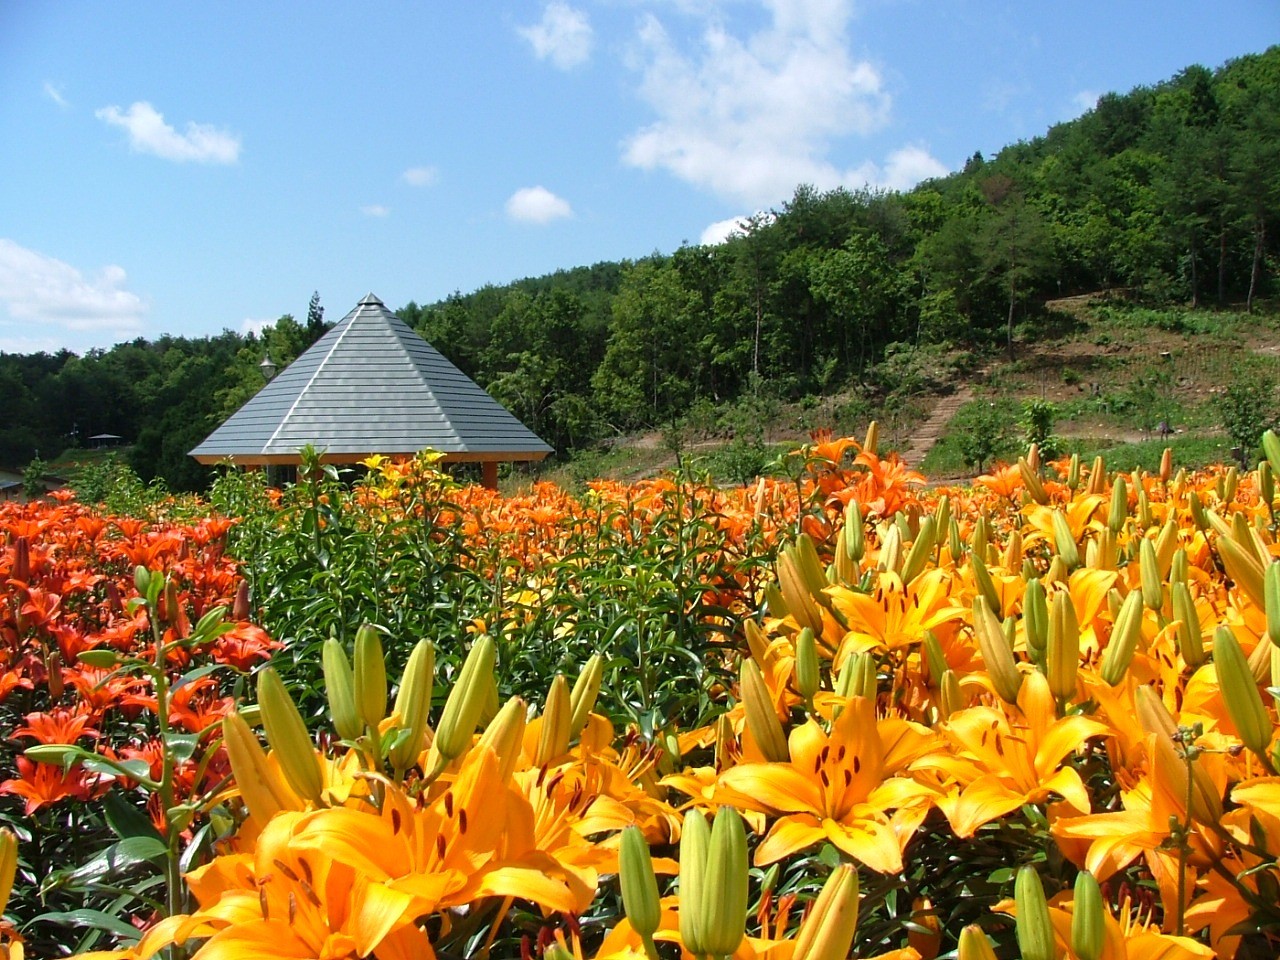 The Dondendaira Lily Garden, the largest in eastern Japan